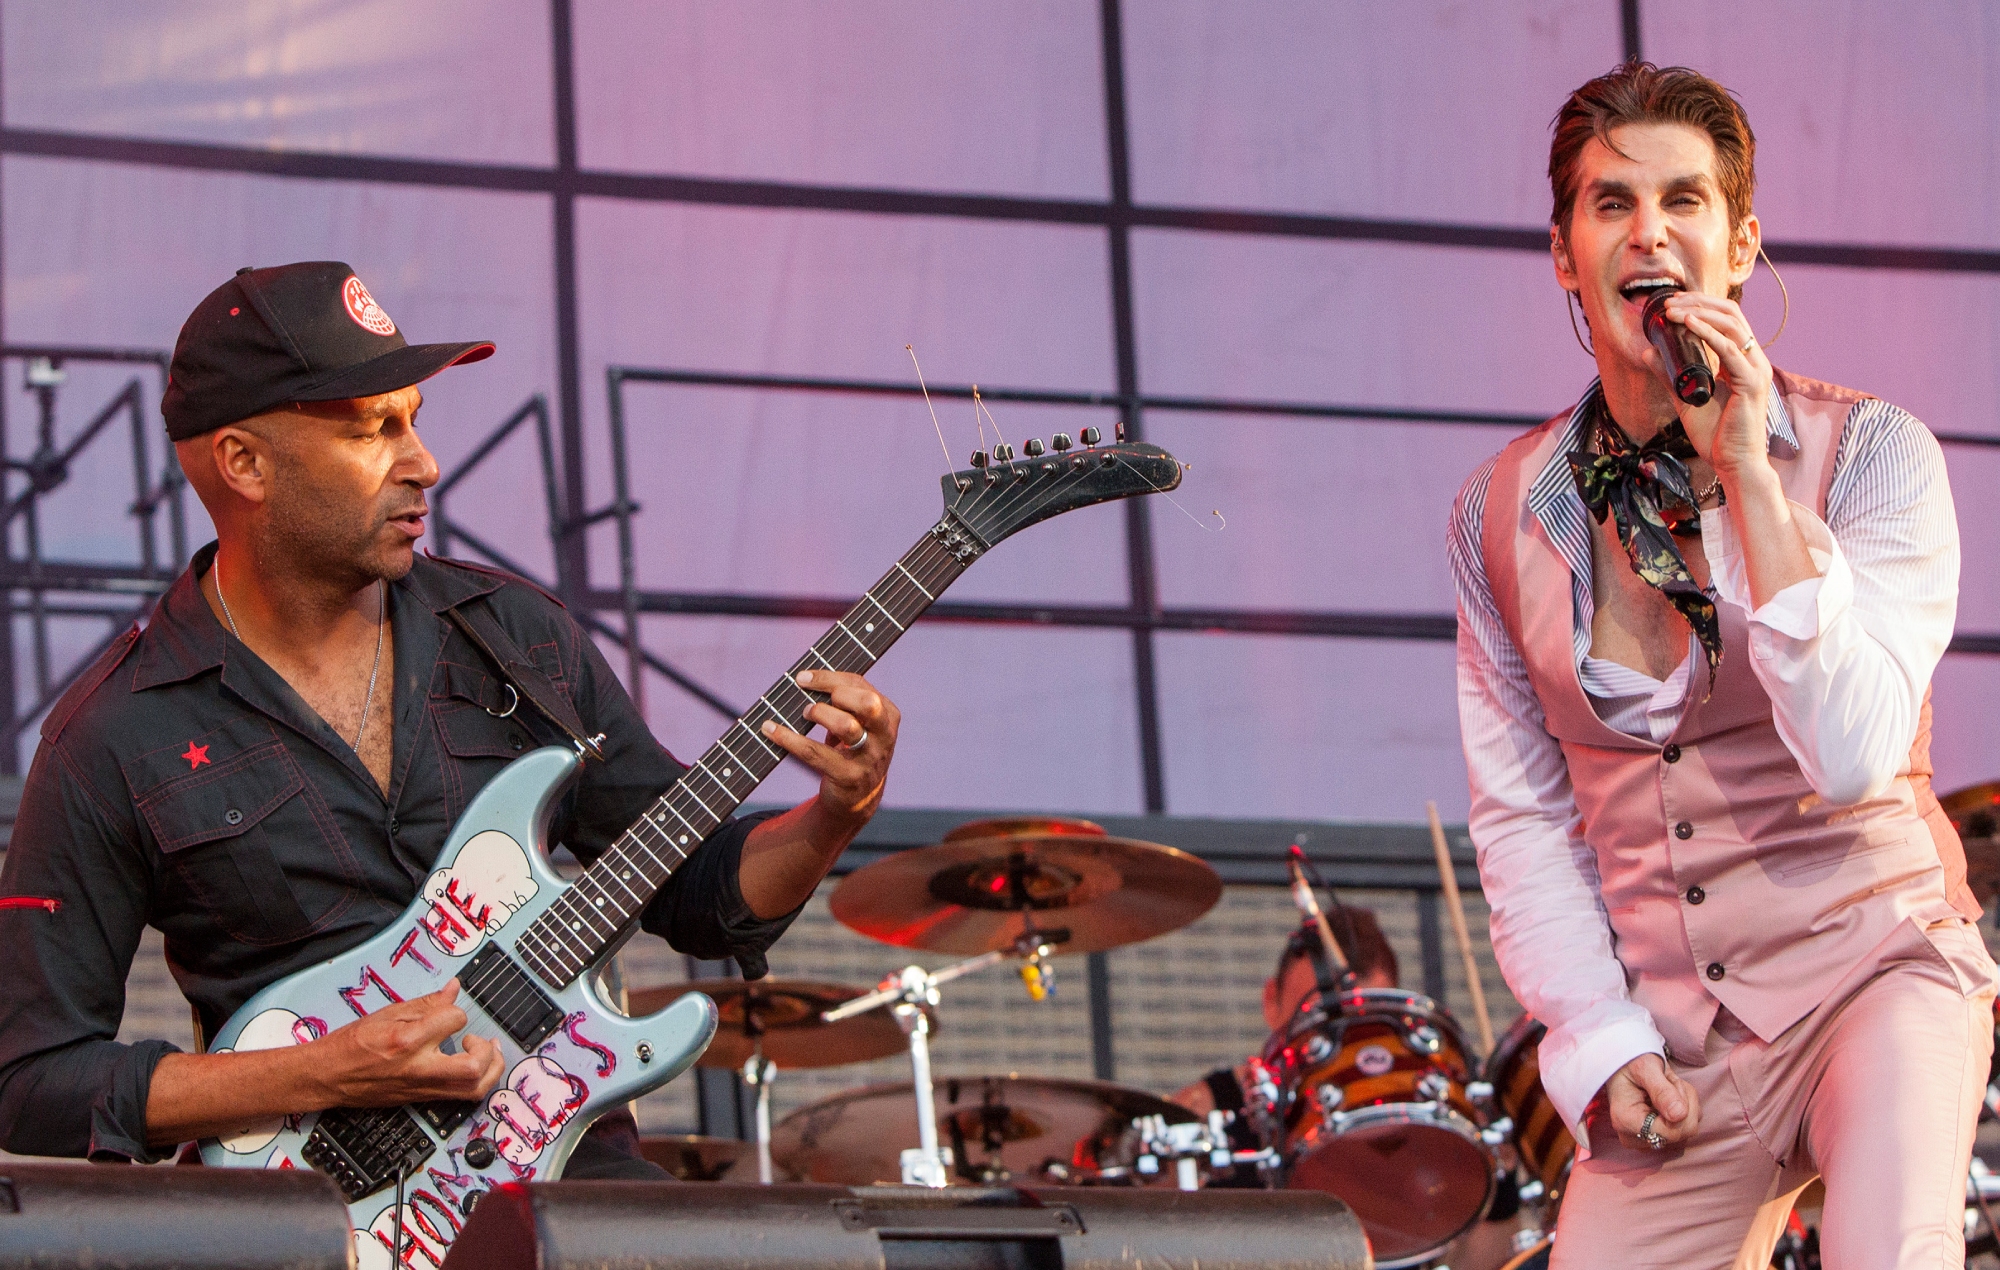 Watch Jane’s Addiction bring out Tom Morello to perform ‘Mountain Song’ and ‘Chip Away’ in Germany